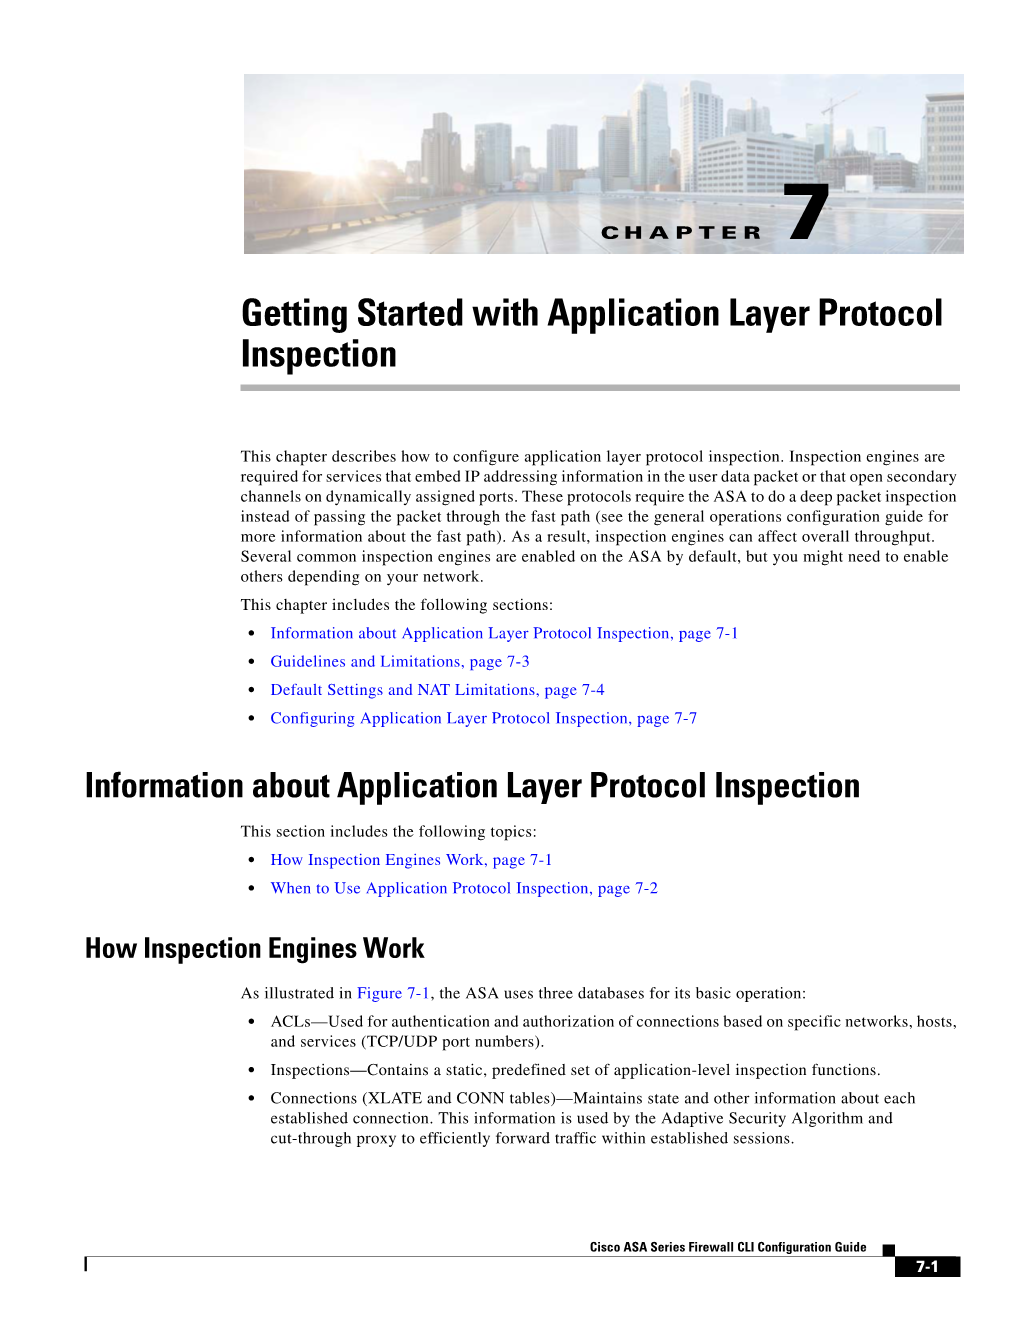 Getting Started with Application Layer Protocol Inspection